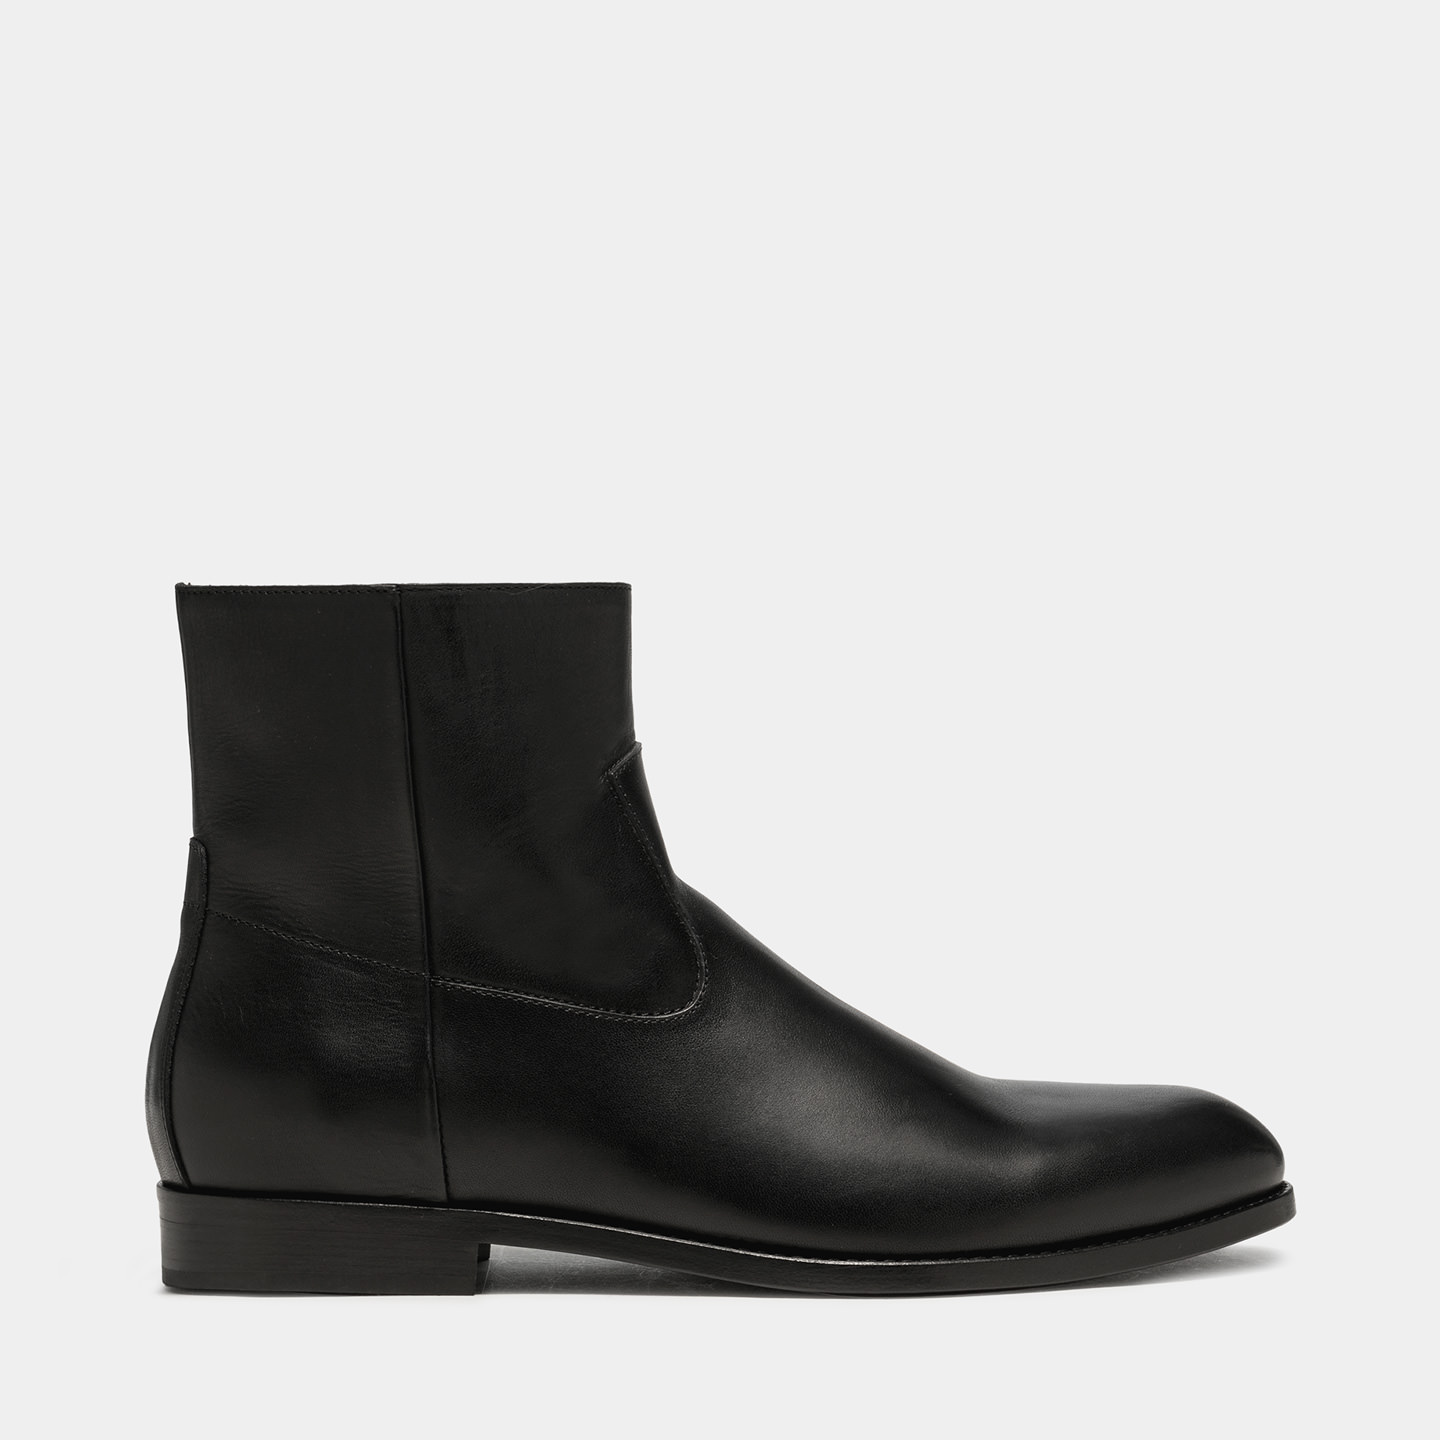 BUTTERO: FLOYD BOOTS IN BLACK LEATHER